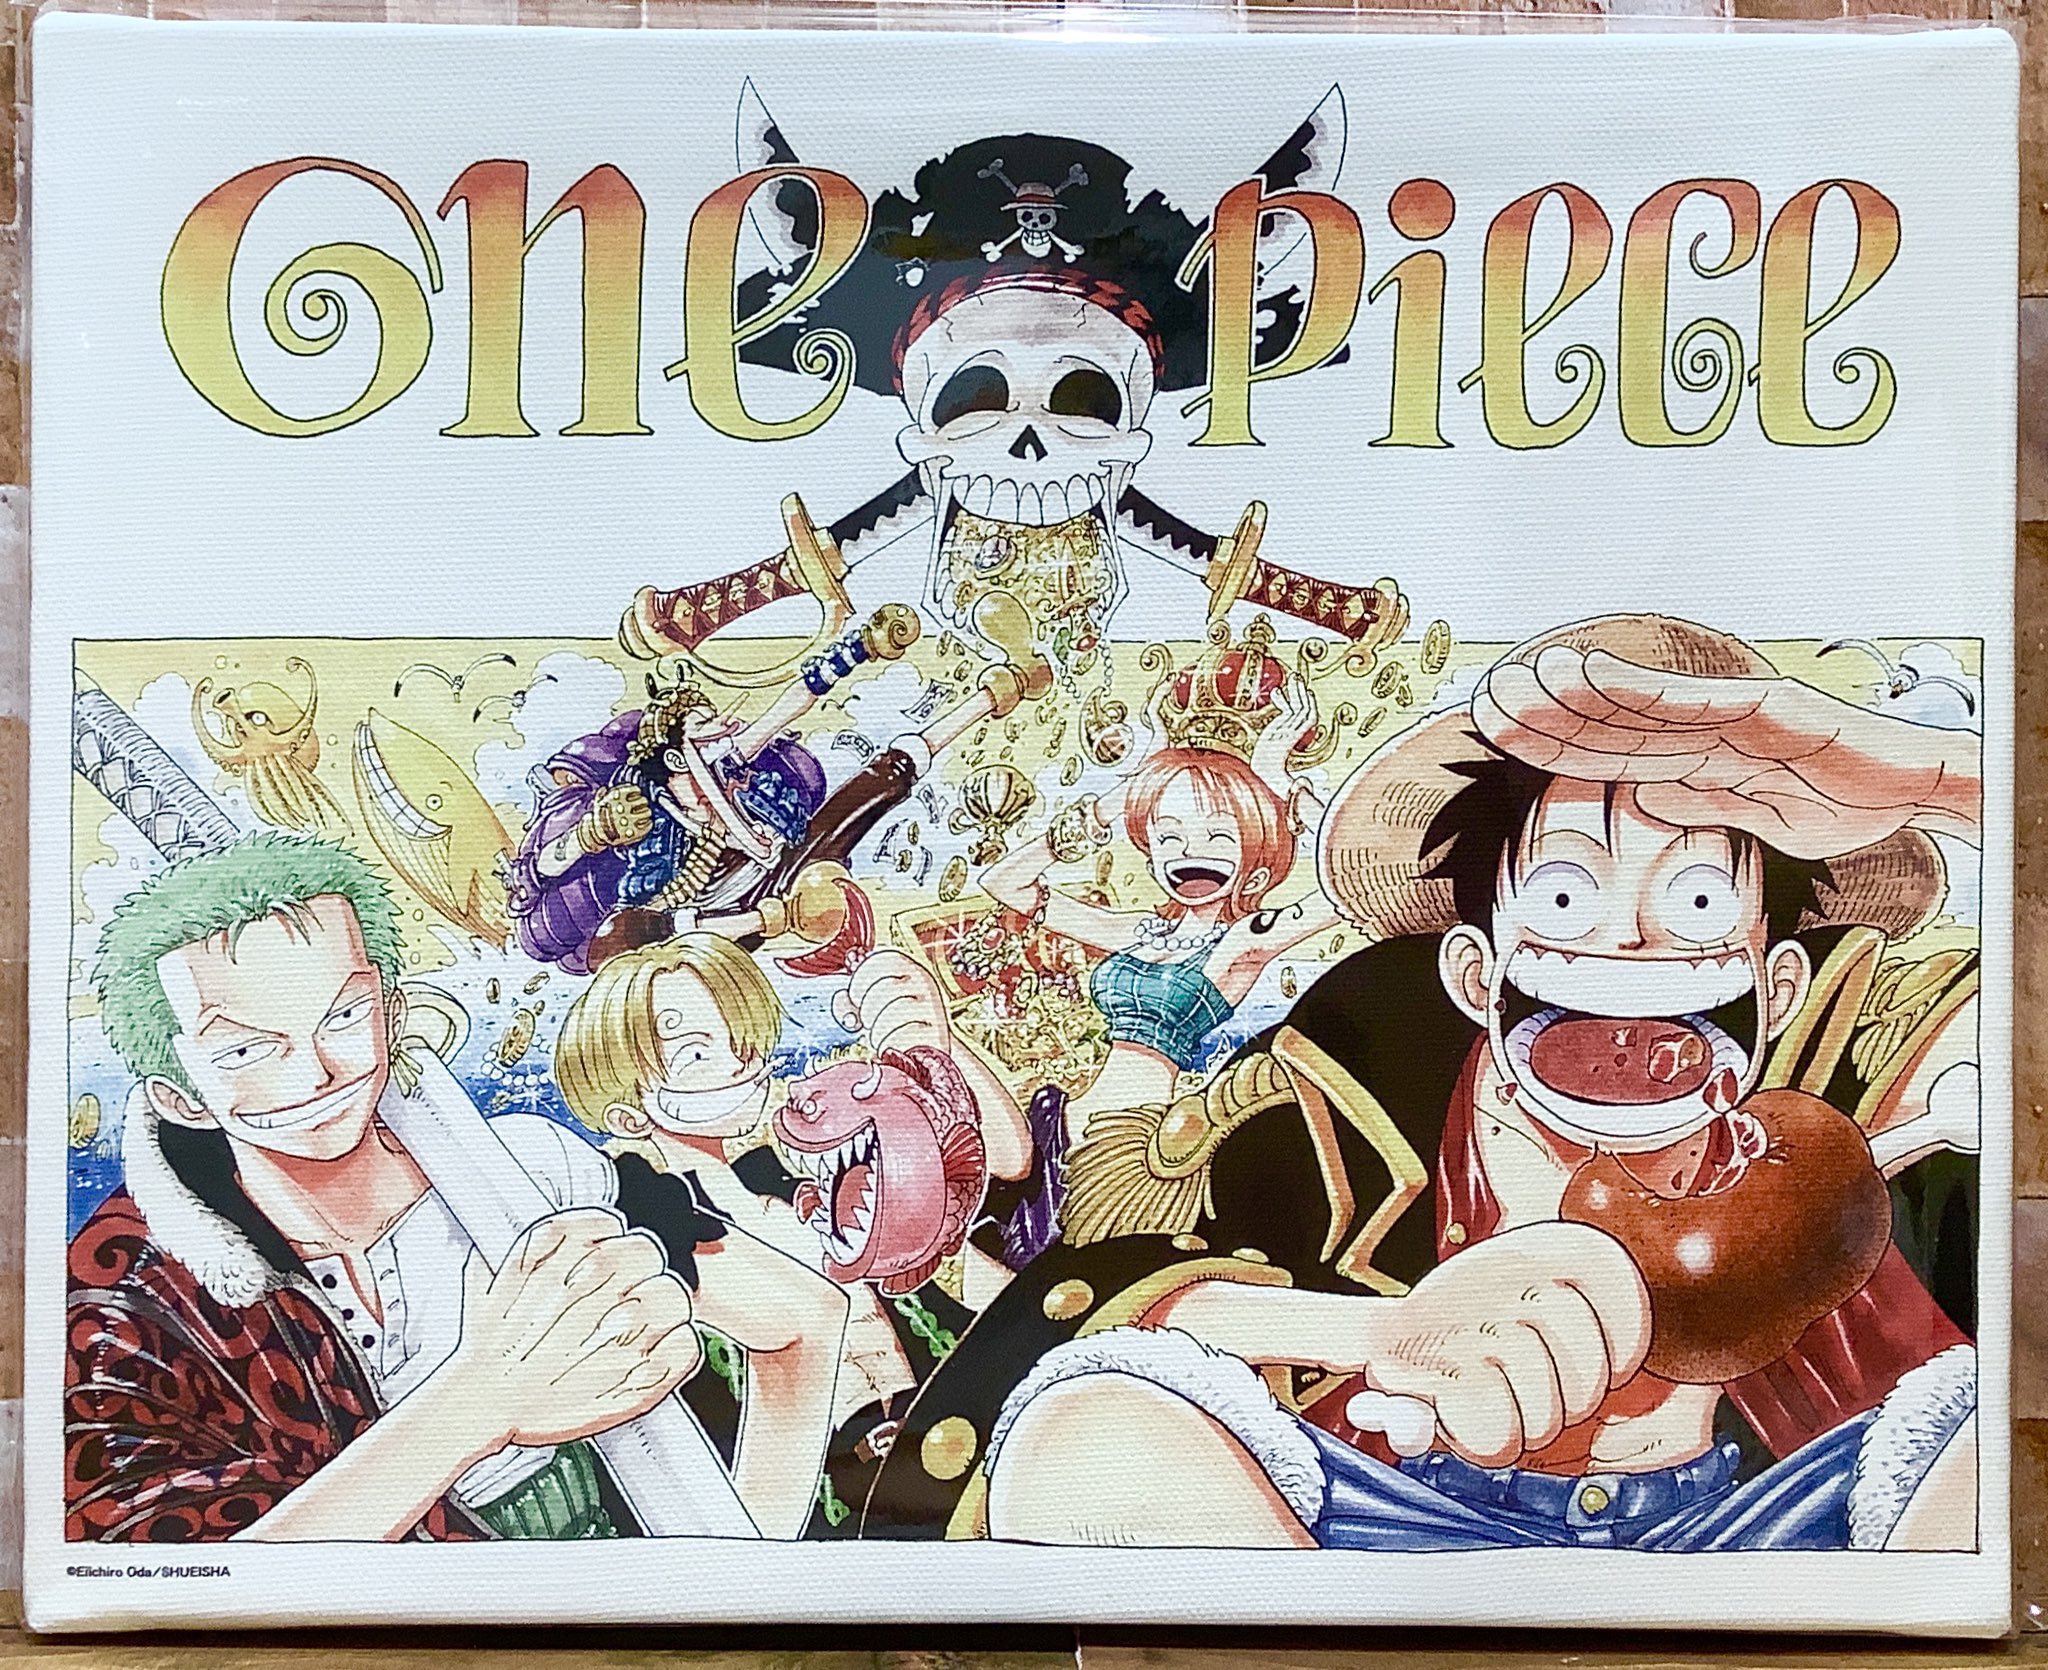 Twitter 上的 One Piece 麦わらストア梅田店 新商品 原画商品 One Piece フルカラーアートボード 100話巻頭カラー 1000話巻頭カラー 5 940円 税込 好評発売中 麦わらストア Onepiece T Co 7kq1hjfr69 Twitter